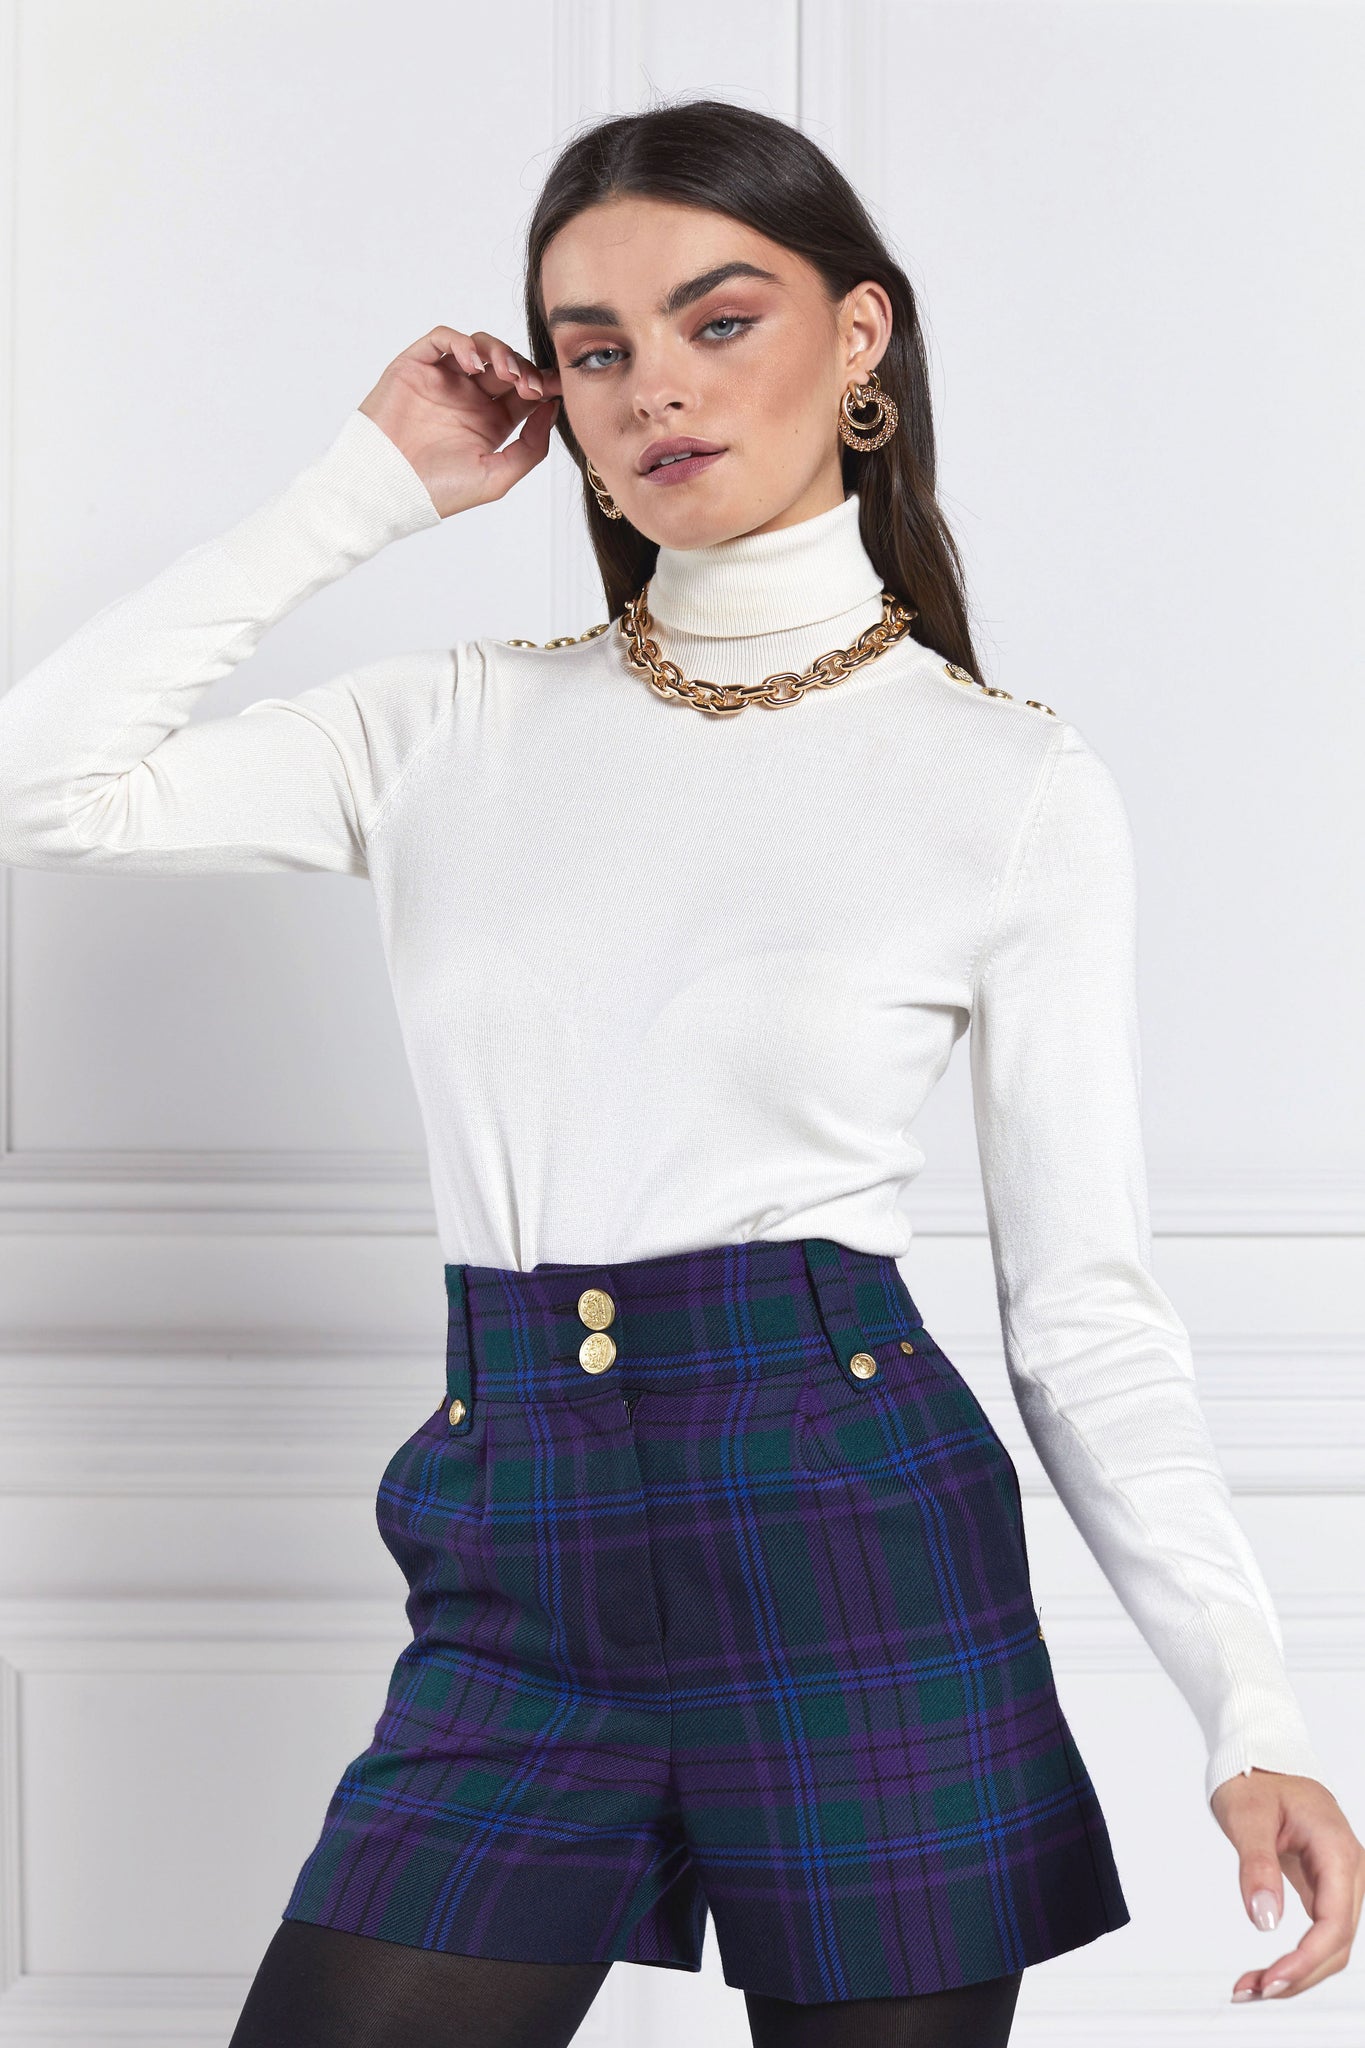 womens blue green and purple tartan high rise tailored shorts with two single knife pleats and centre front zip fly fastening with twin branded gold stud buttons and side hip pockets with branded rivet detailing at top and bottom of pockets worn with white roll neck